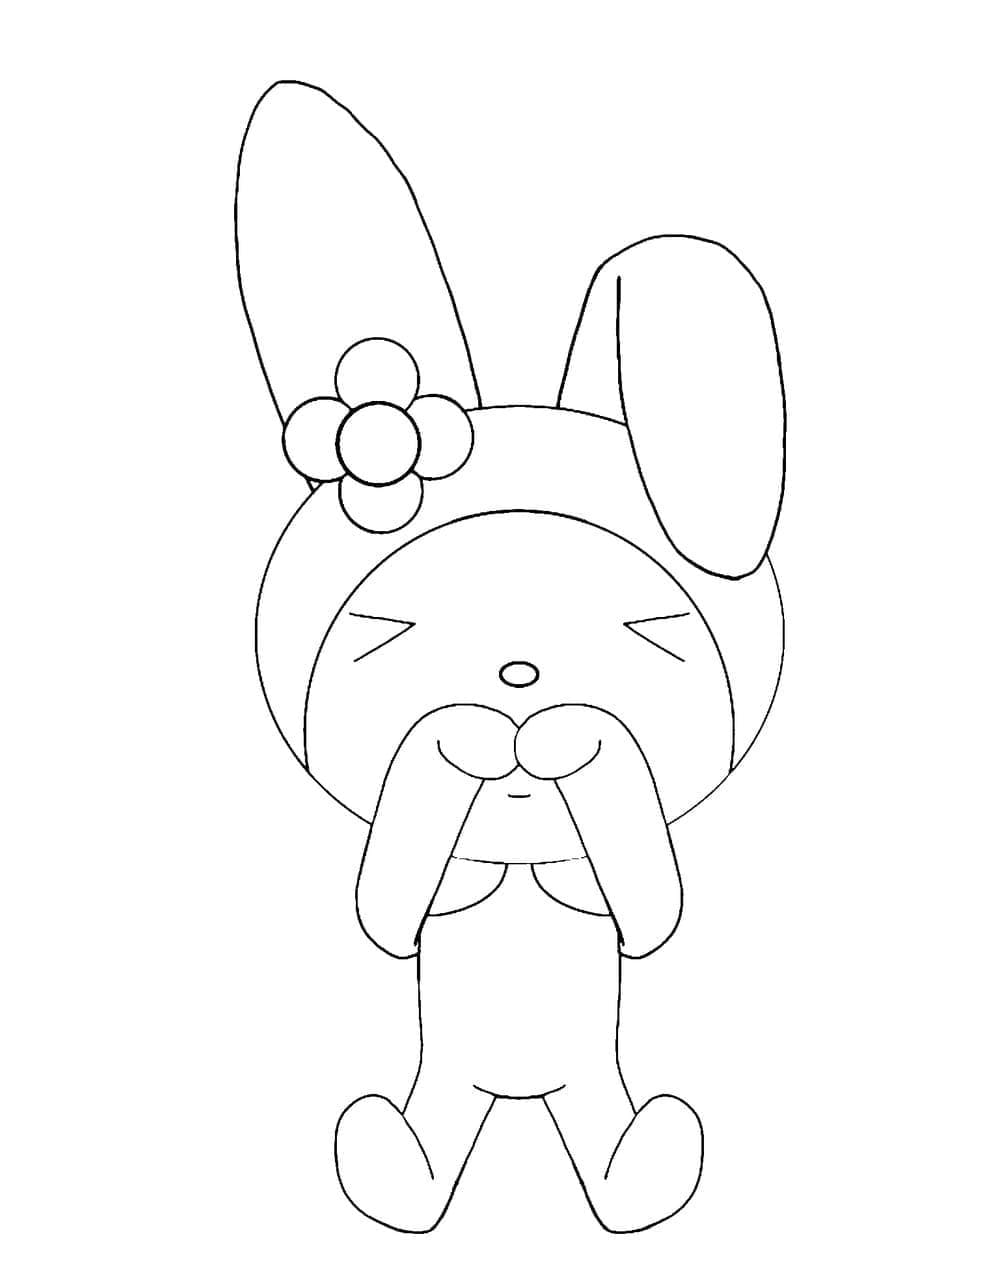 Adorable My Melody coloring page - Download, Print or Color Online for Free